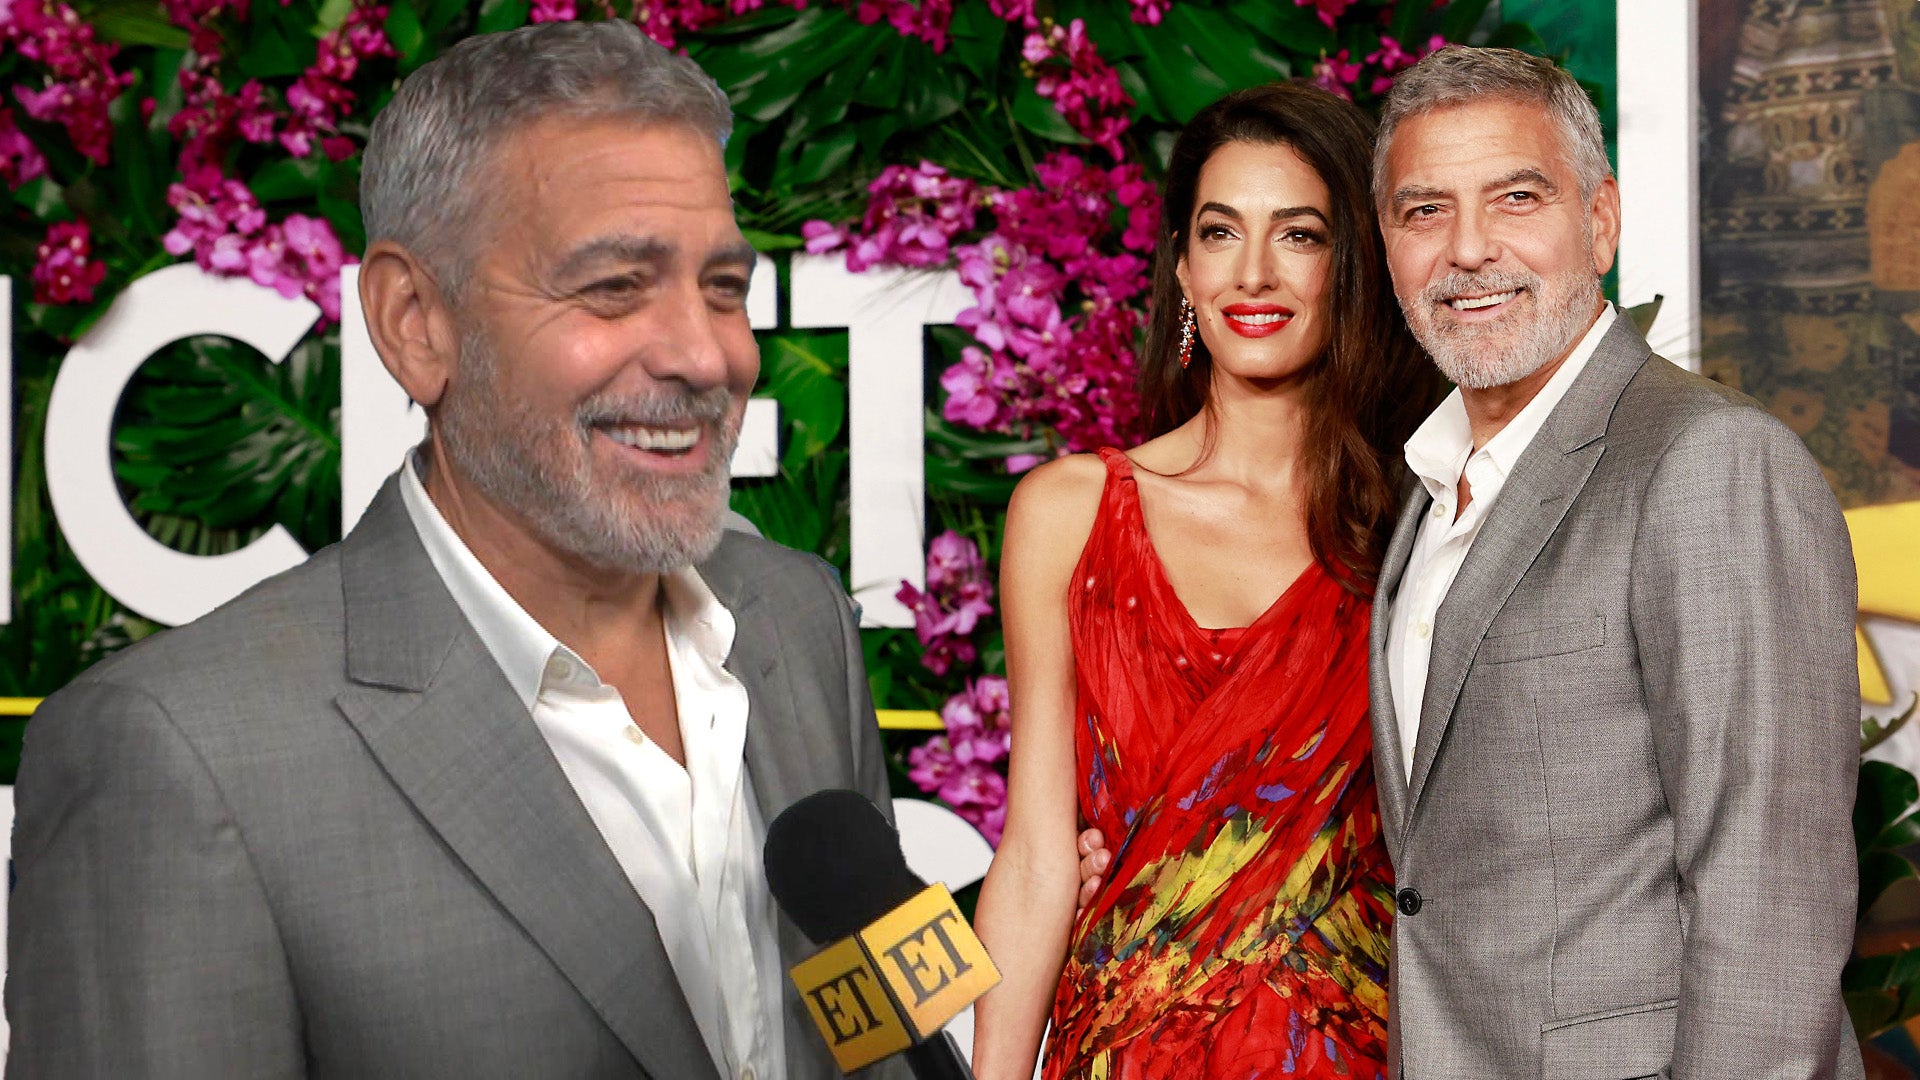 Exclusive Details: Inside George Clooney's Dinner With Amal & His Mom